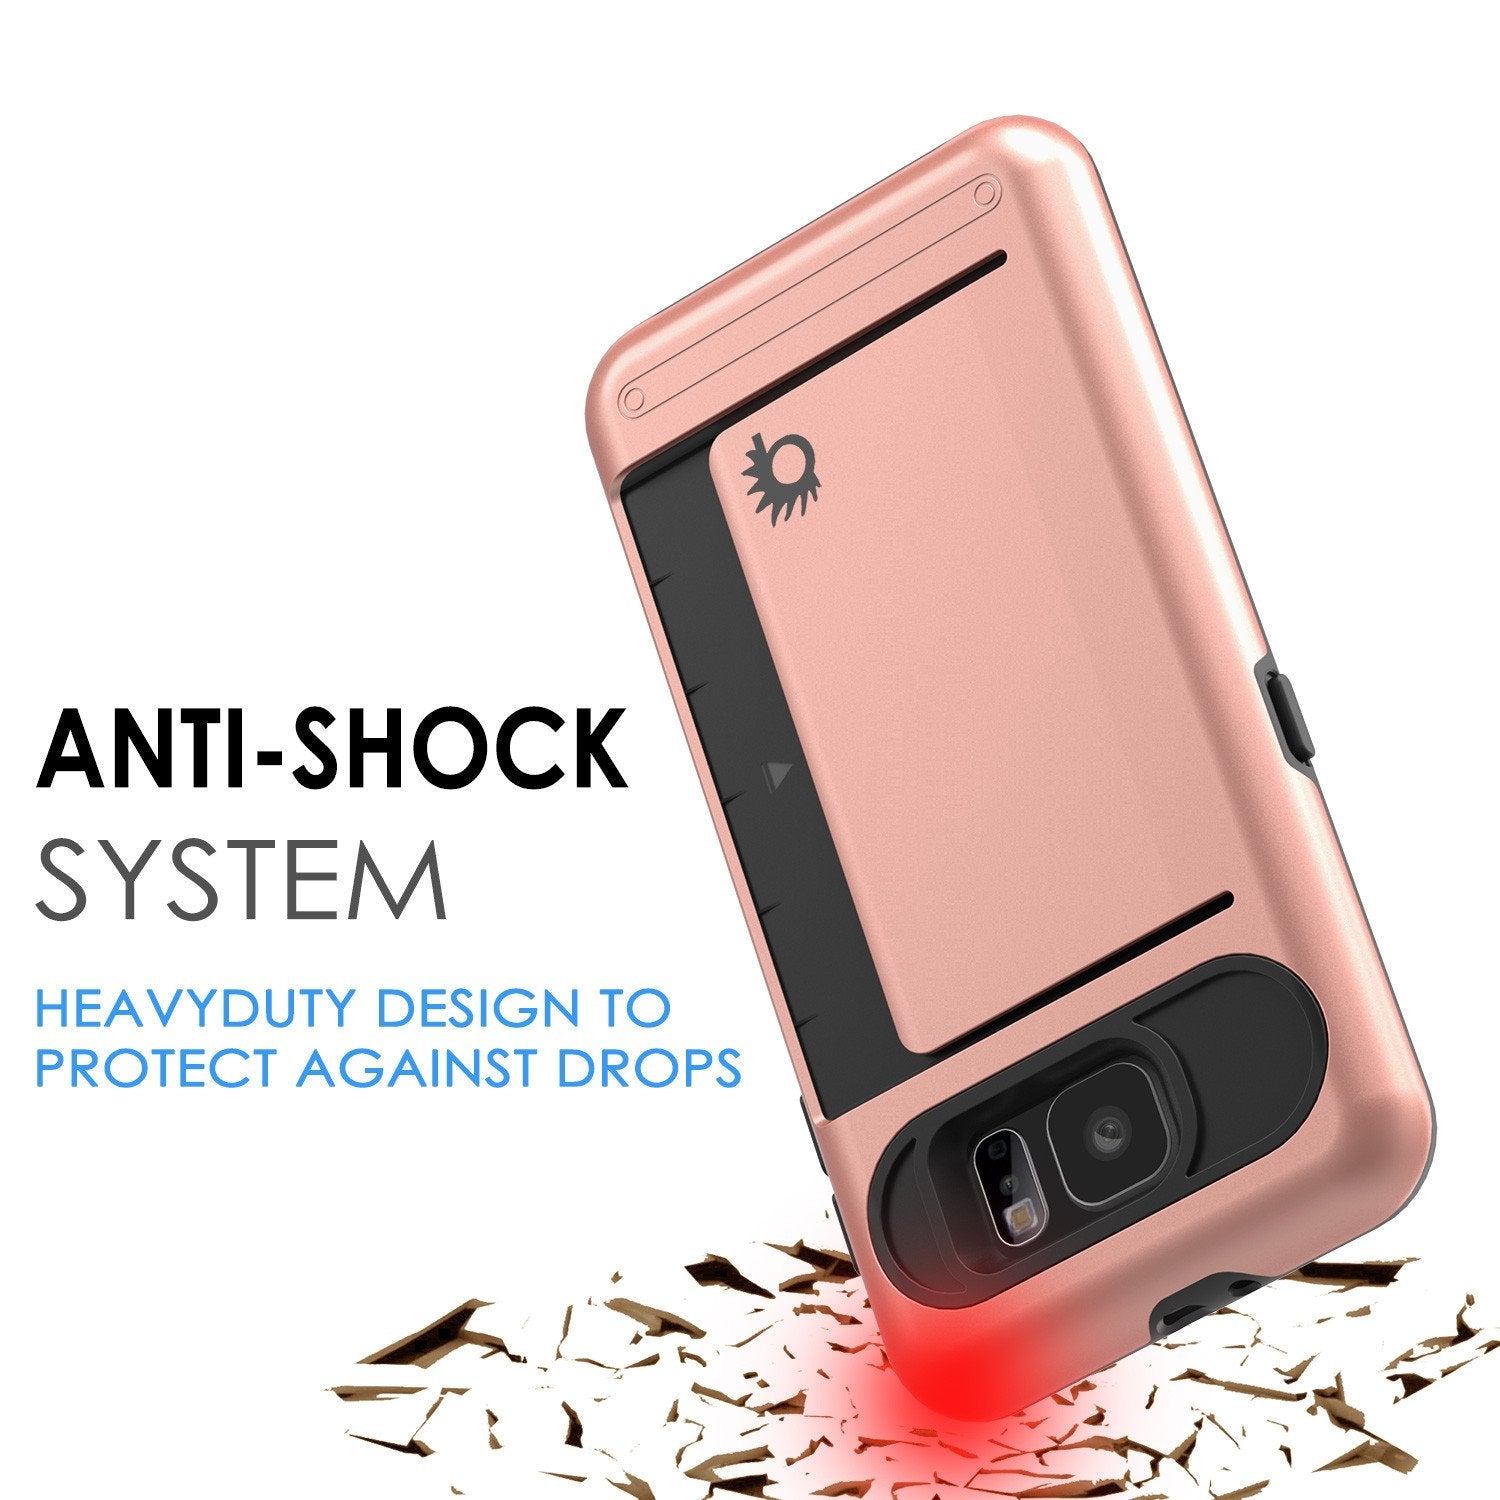 Galaxy S6 EDGE Case PunkCase CLUTCH Rose Gold Series Slim Armor Soft Cover Case w/ Screen Protector - PunkCase NZ